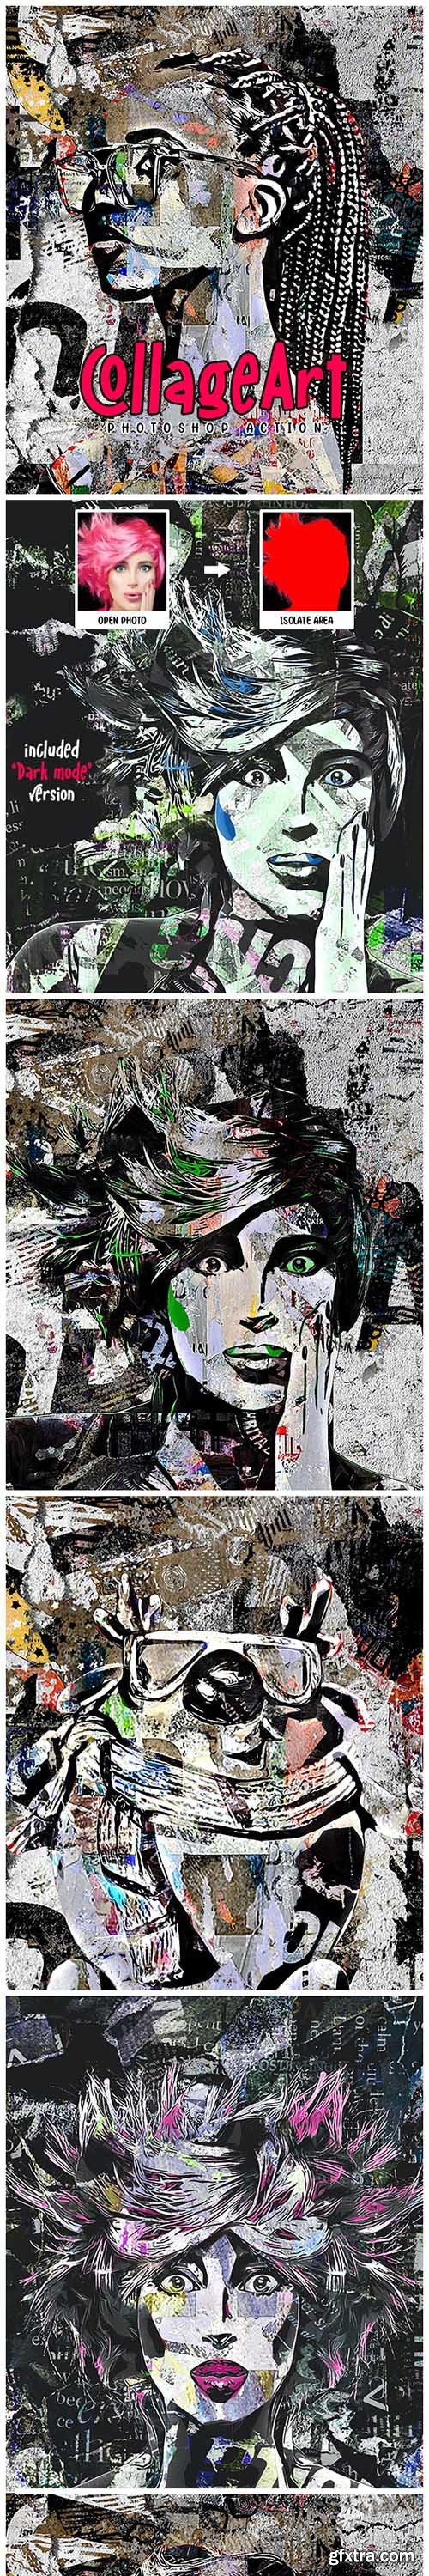 Graphicriver - CollageArt - Photoshop Action 35658056